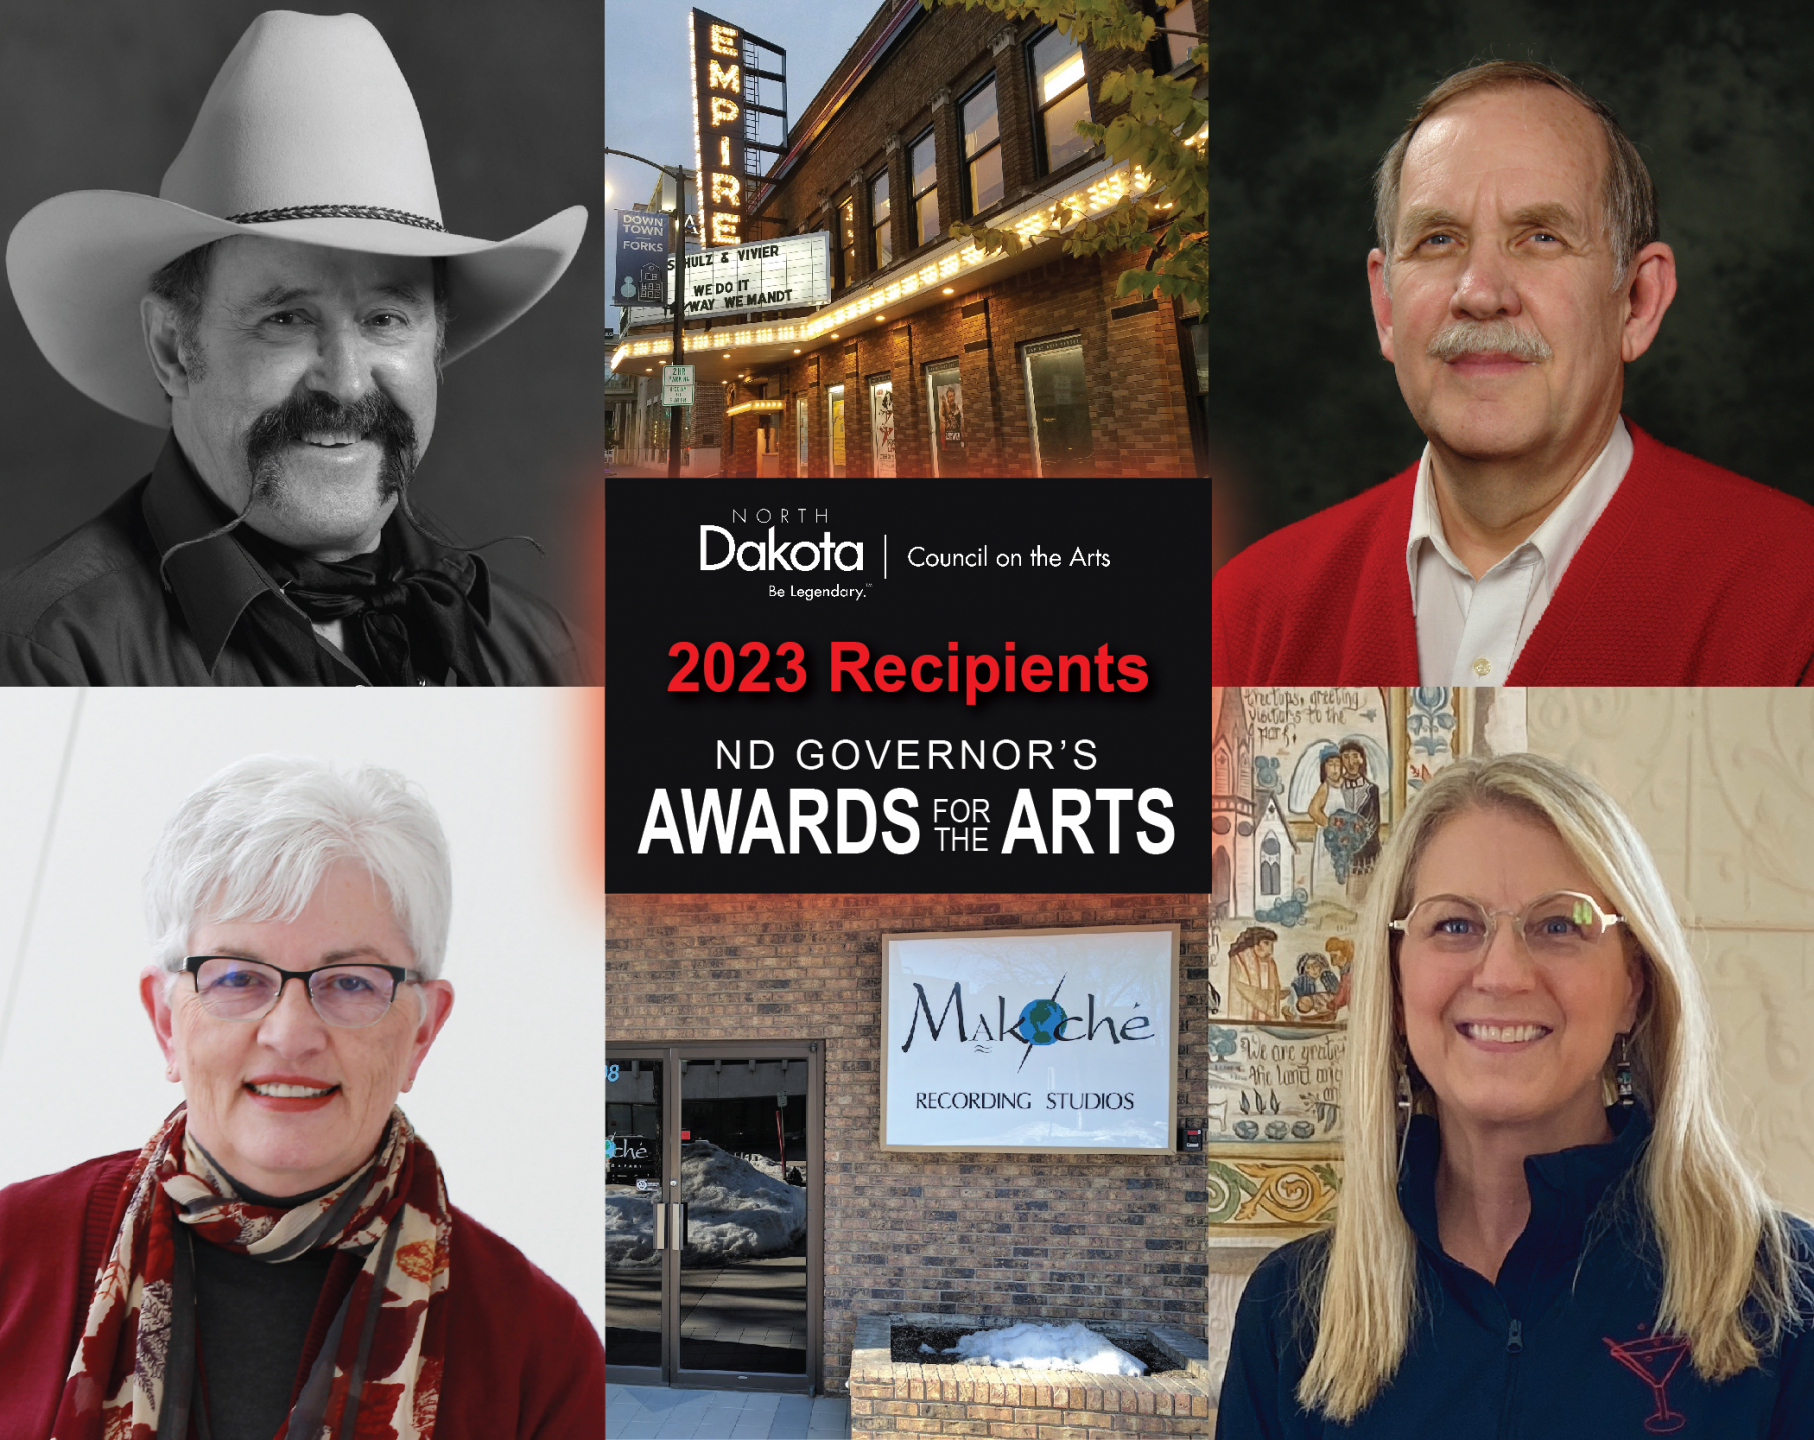 Congratulation to the 2023 recipients of the ND Governor's Awards for the Arts:  Individual Achievement: Pieper Fleck Bloomquist (bottom right) Nonprofit Arts Organization: Empire Arts Center (top center) For-Profit Arts Organization: Makoché Recording Studios (bottom center) Arts in Education: Donald E. Larew (top right) Individual Cultural Heritage: Bill Lowman (top left) Champion for the Arts: Former Senator Joan Heckaman (bottom left)